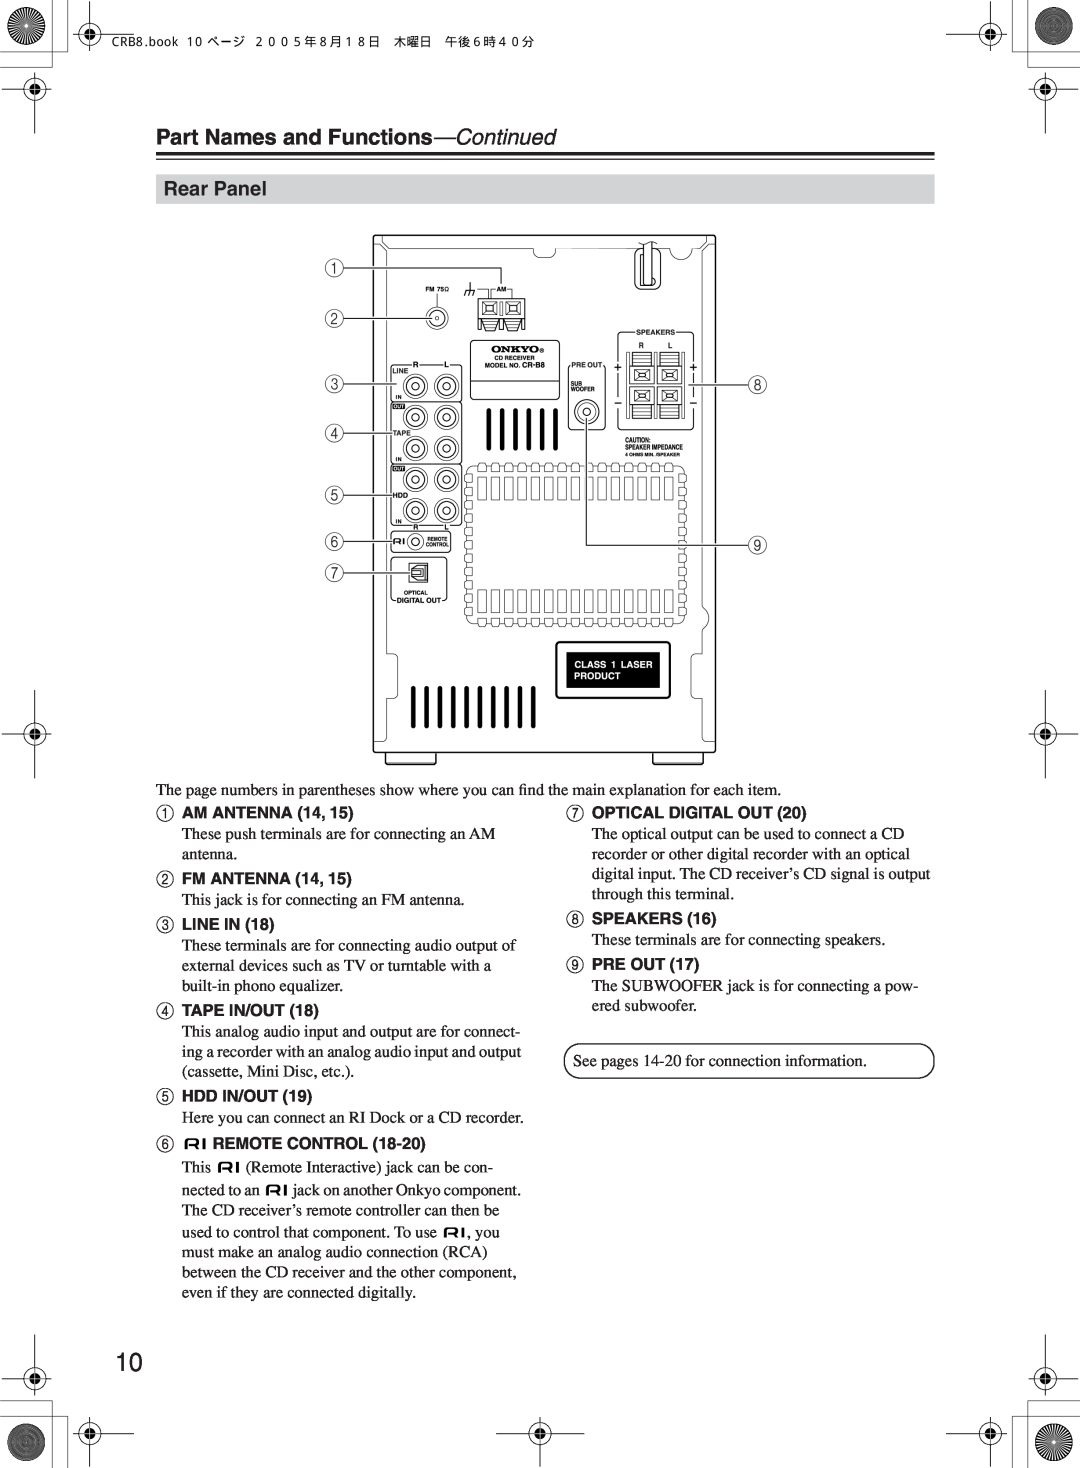 Onkyo CR-B8 Rear Panel, Part Names and Functions-Continued, 1 2, Aam Antenna, Bfm Antenna, Cline In, Dtape In/Out 